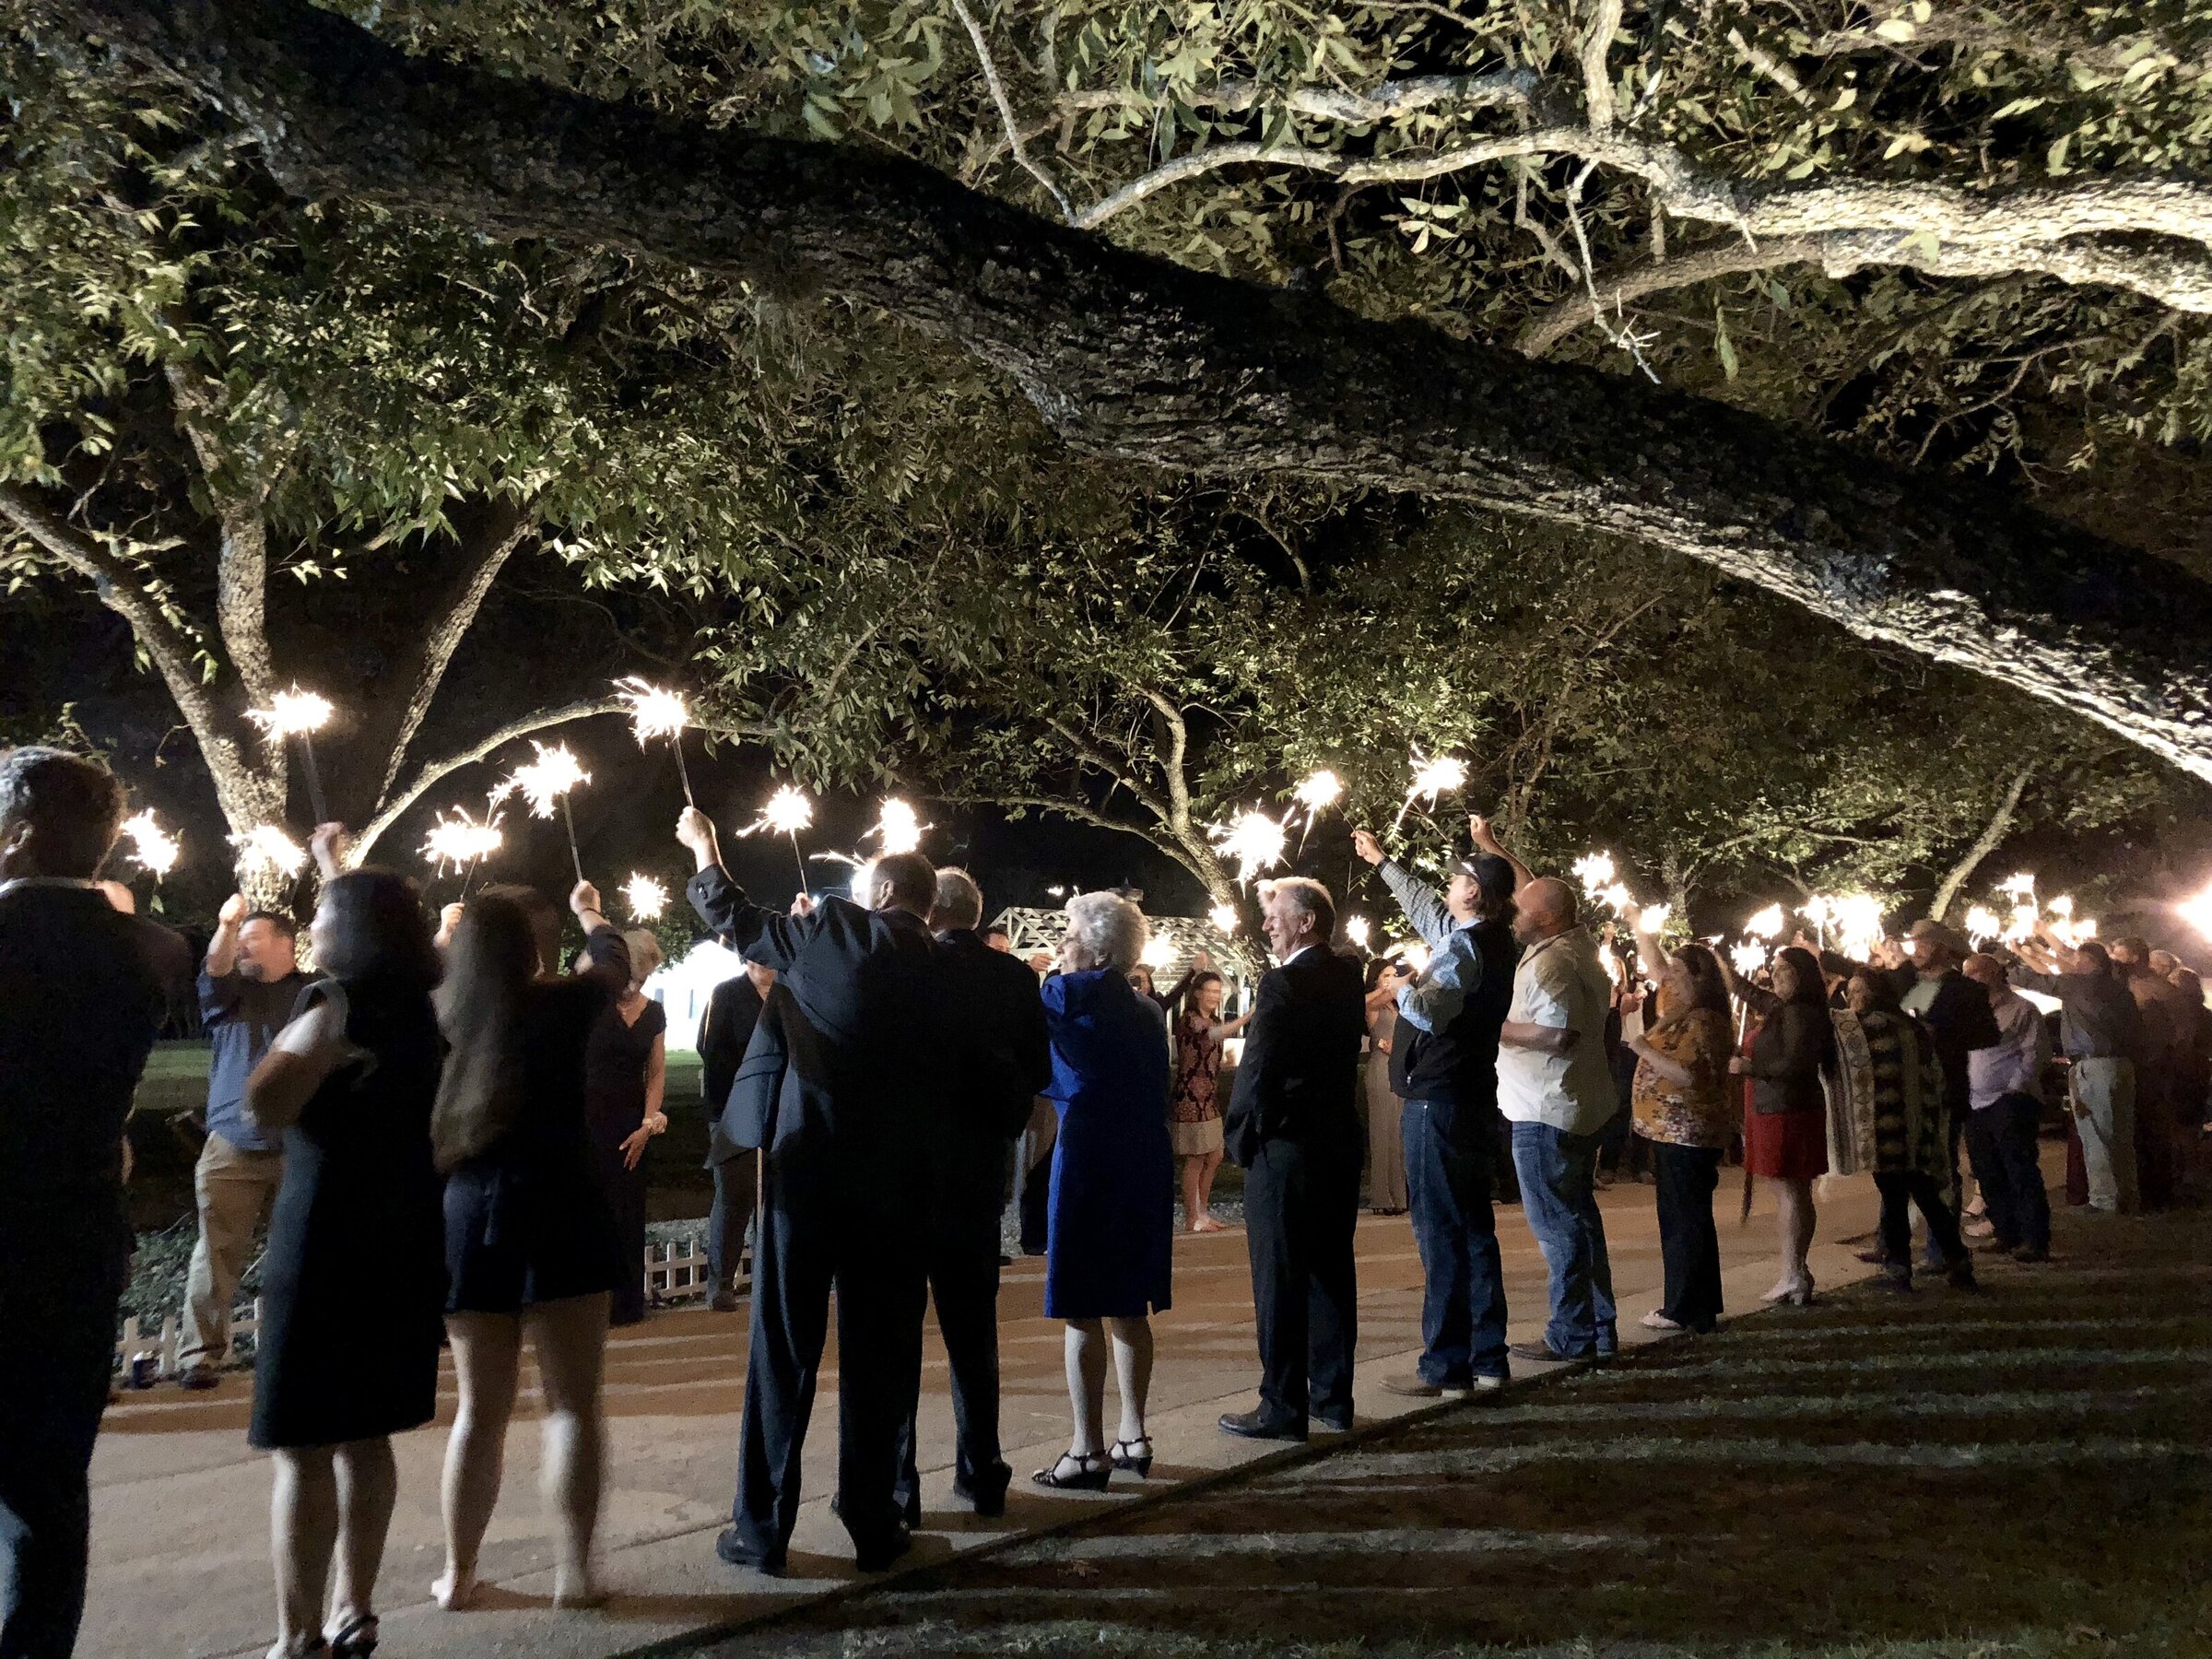 The grand exit for a wedding at the Grand Texana. Guests are holding sparklers underneath the pecan trees